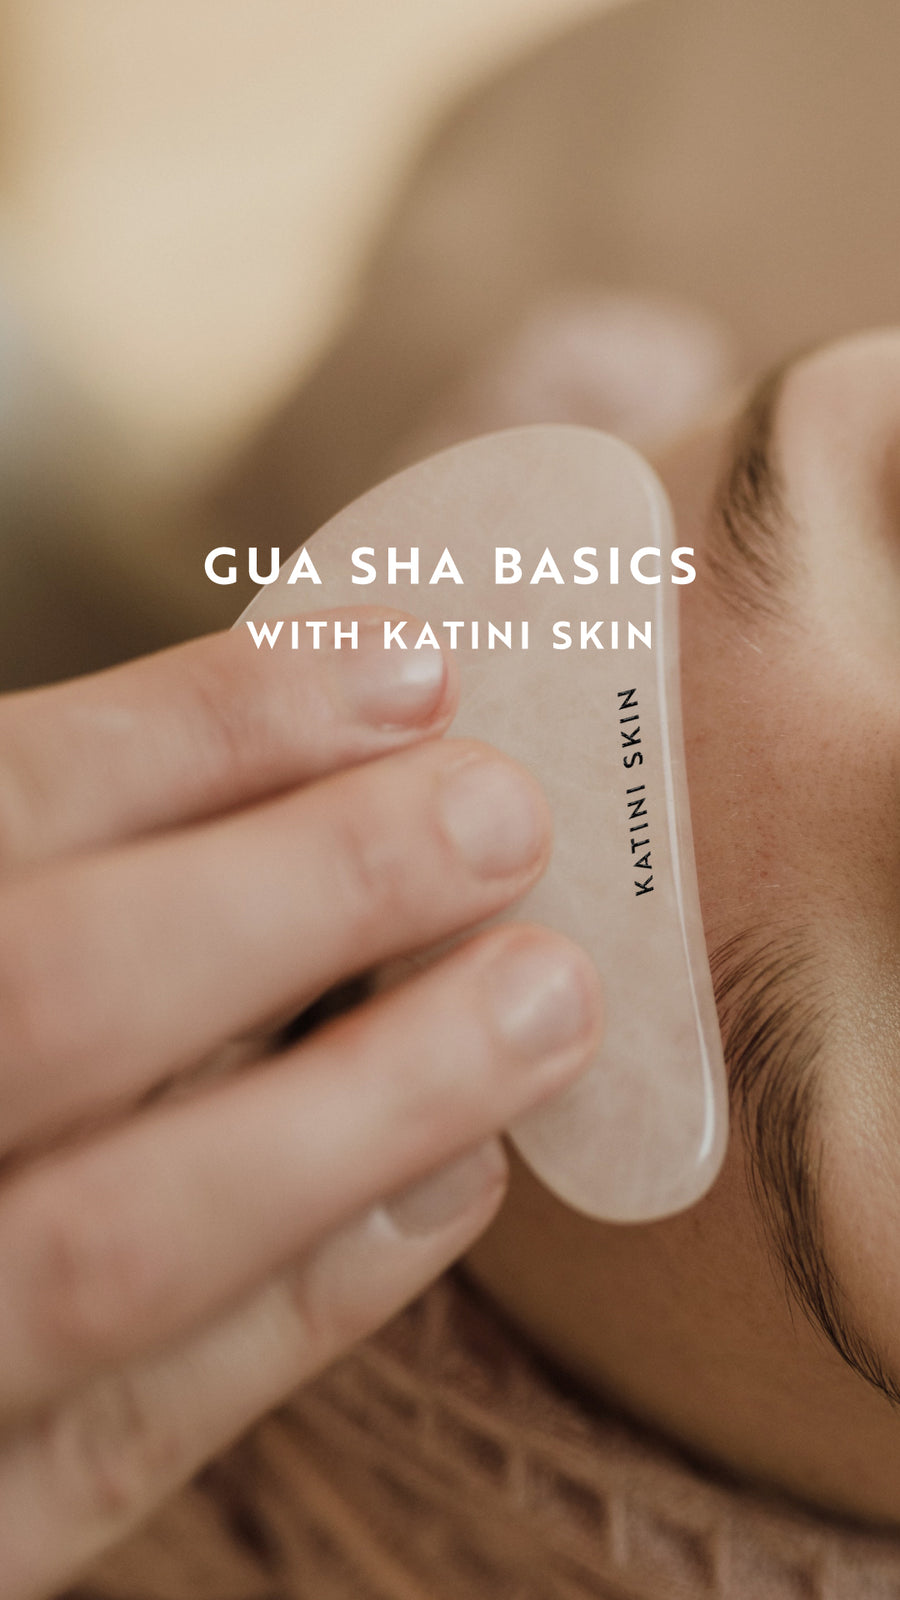 Katini Skin's Jade Gua Sha helps improve circulation, facial contouring, and skin health. Suitable for all skin types.